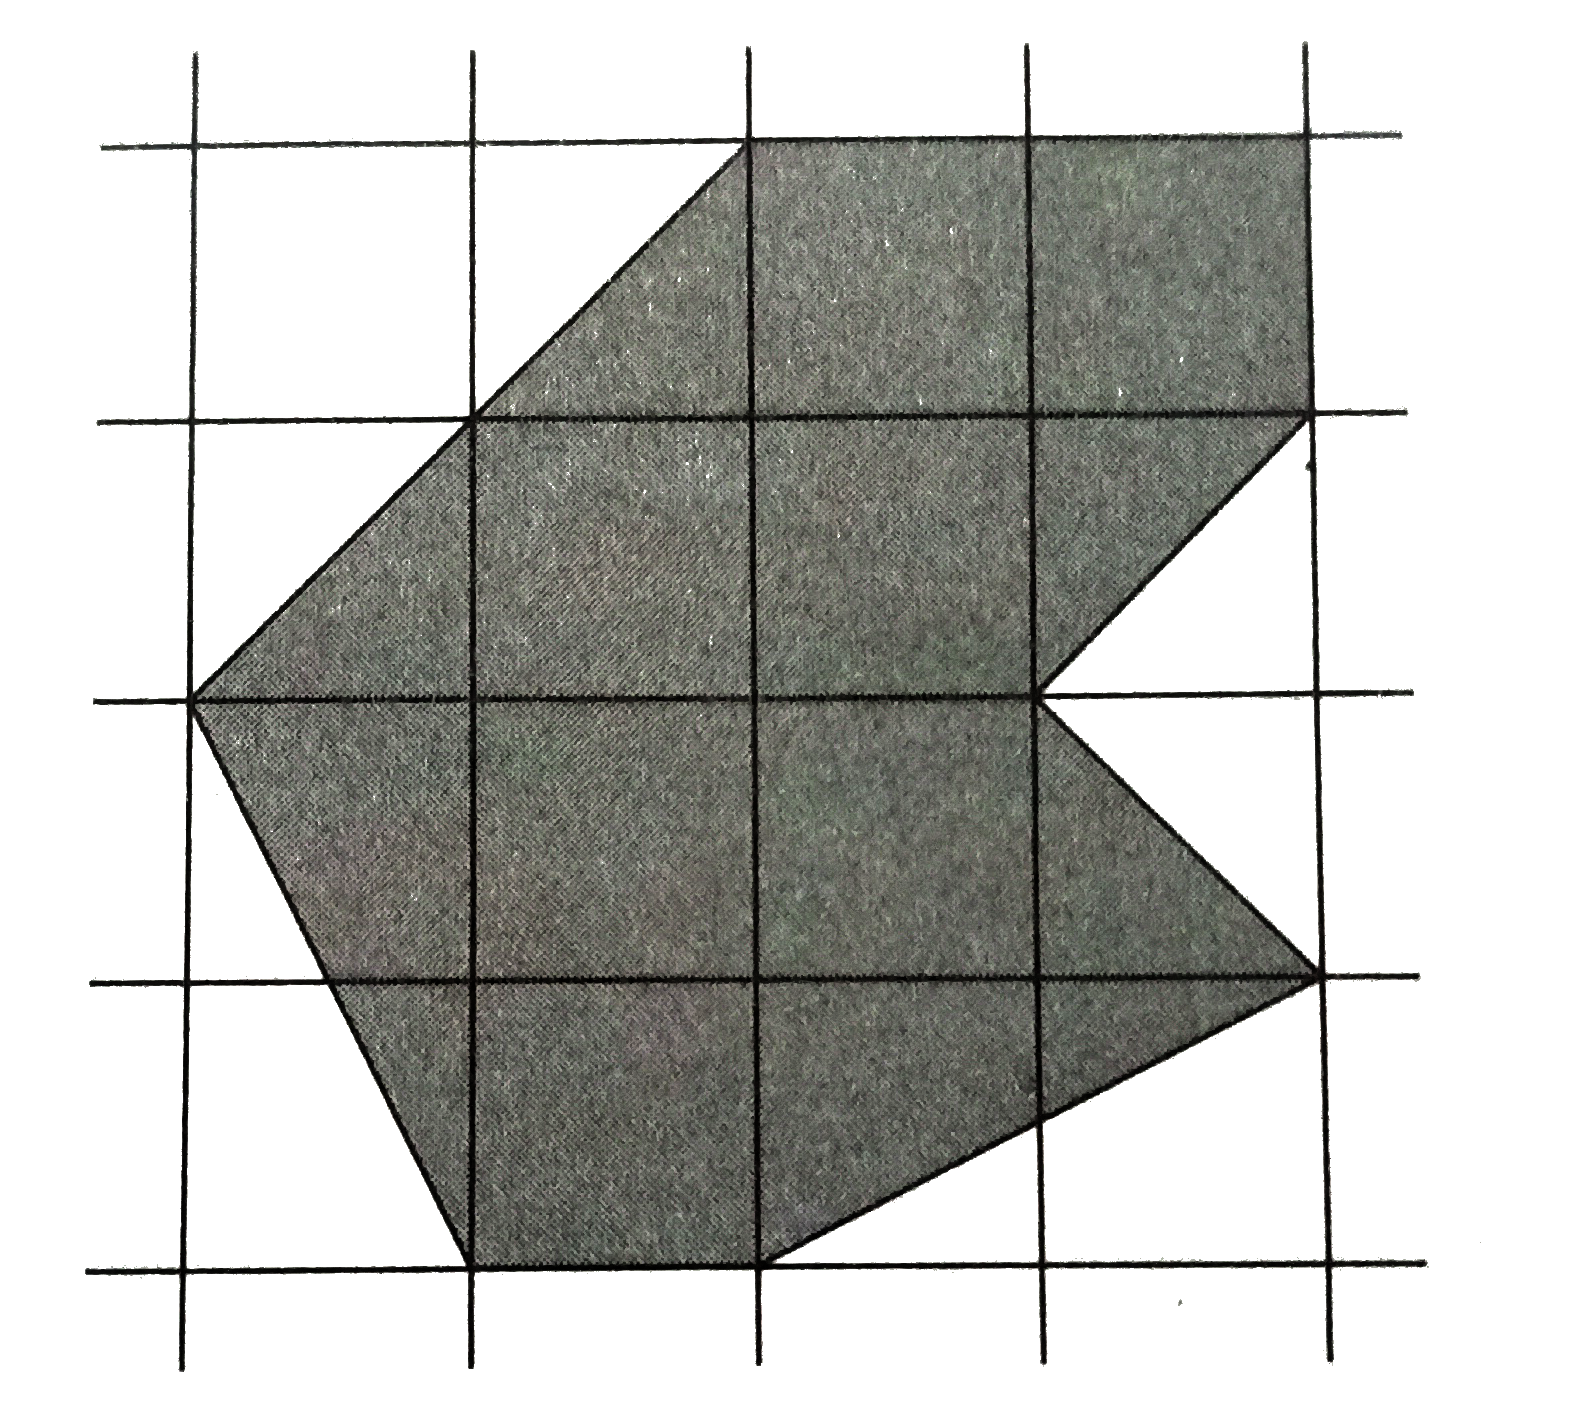 The  figure  shows  a portion of a  tile  floor  from  which  the shaded  polygon  will be  cut  in order  to make  a repair  a  Each  square  tile has  sides  that  measure  I foot ,Every  vertex  of the  shaded  polygon  is at the  intersection  of 2    tiles  . what  is the  area  , in  square  feet of the  shaded  poluygon ?